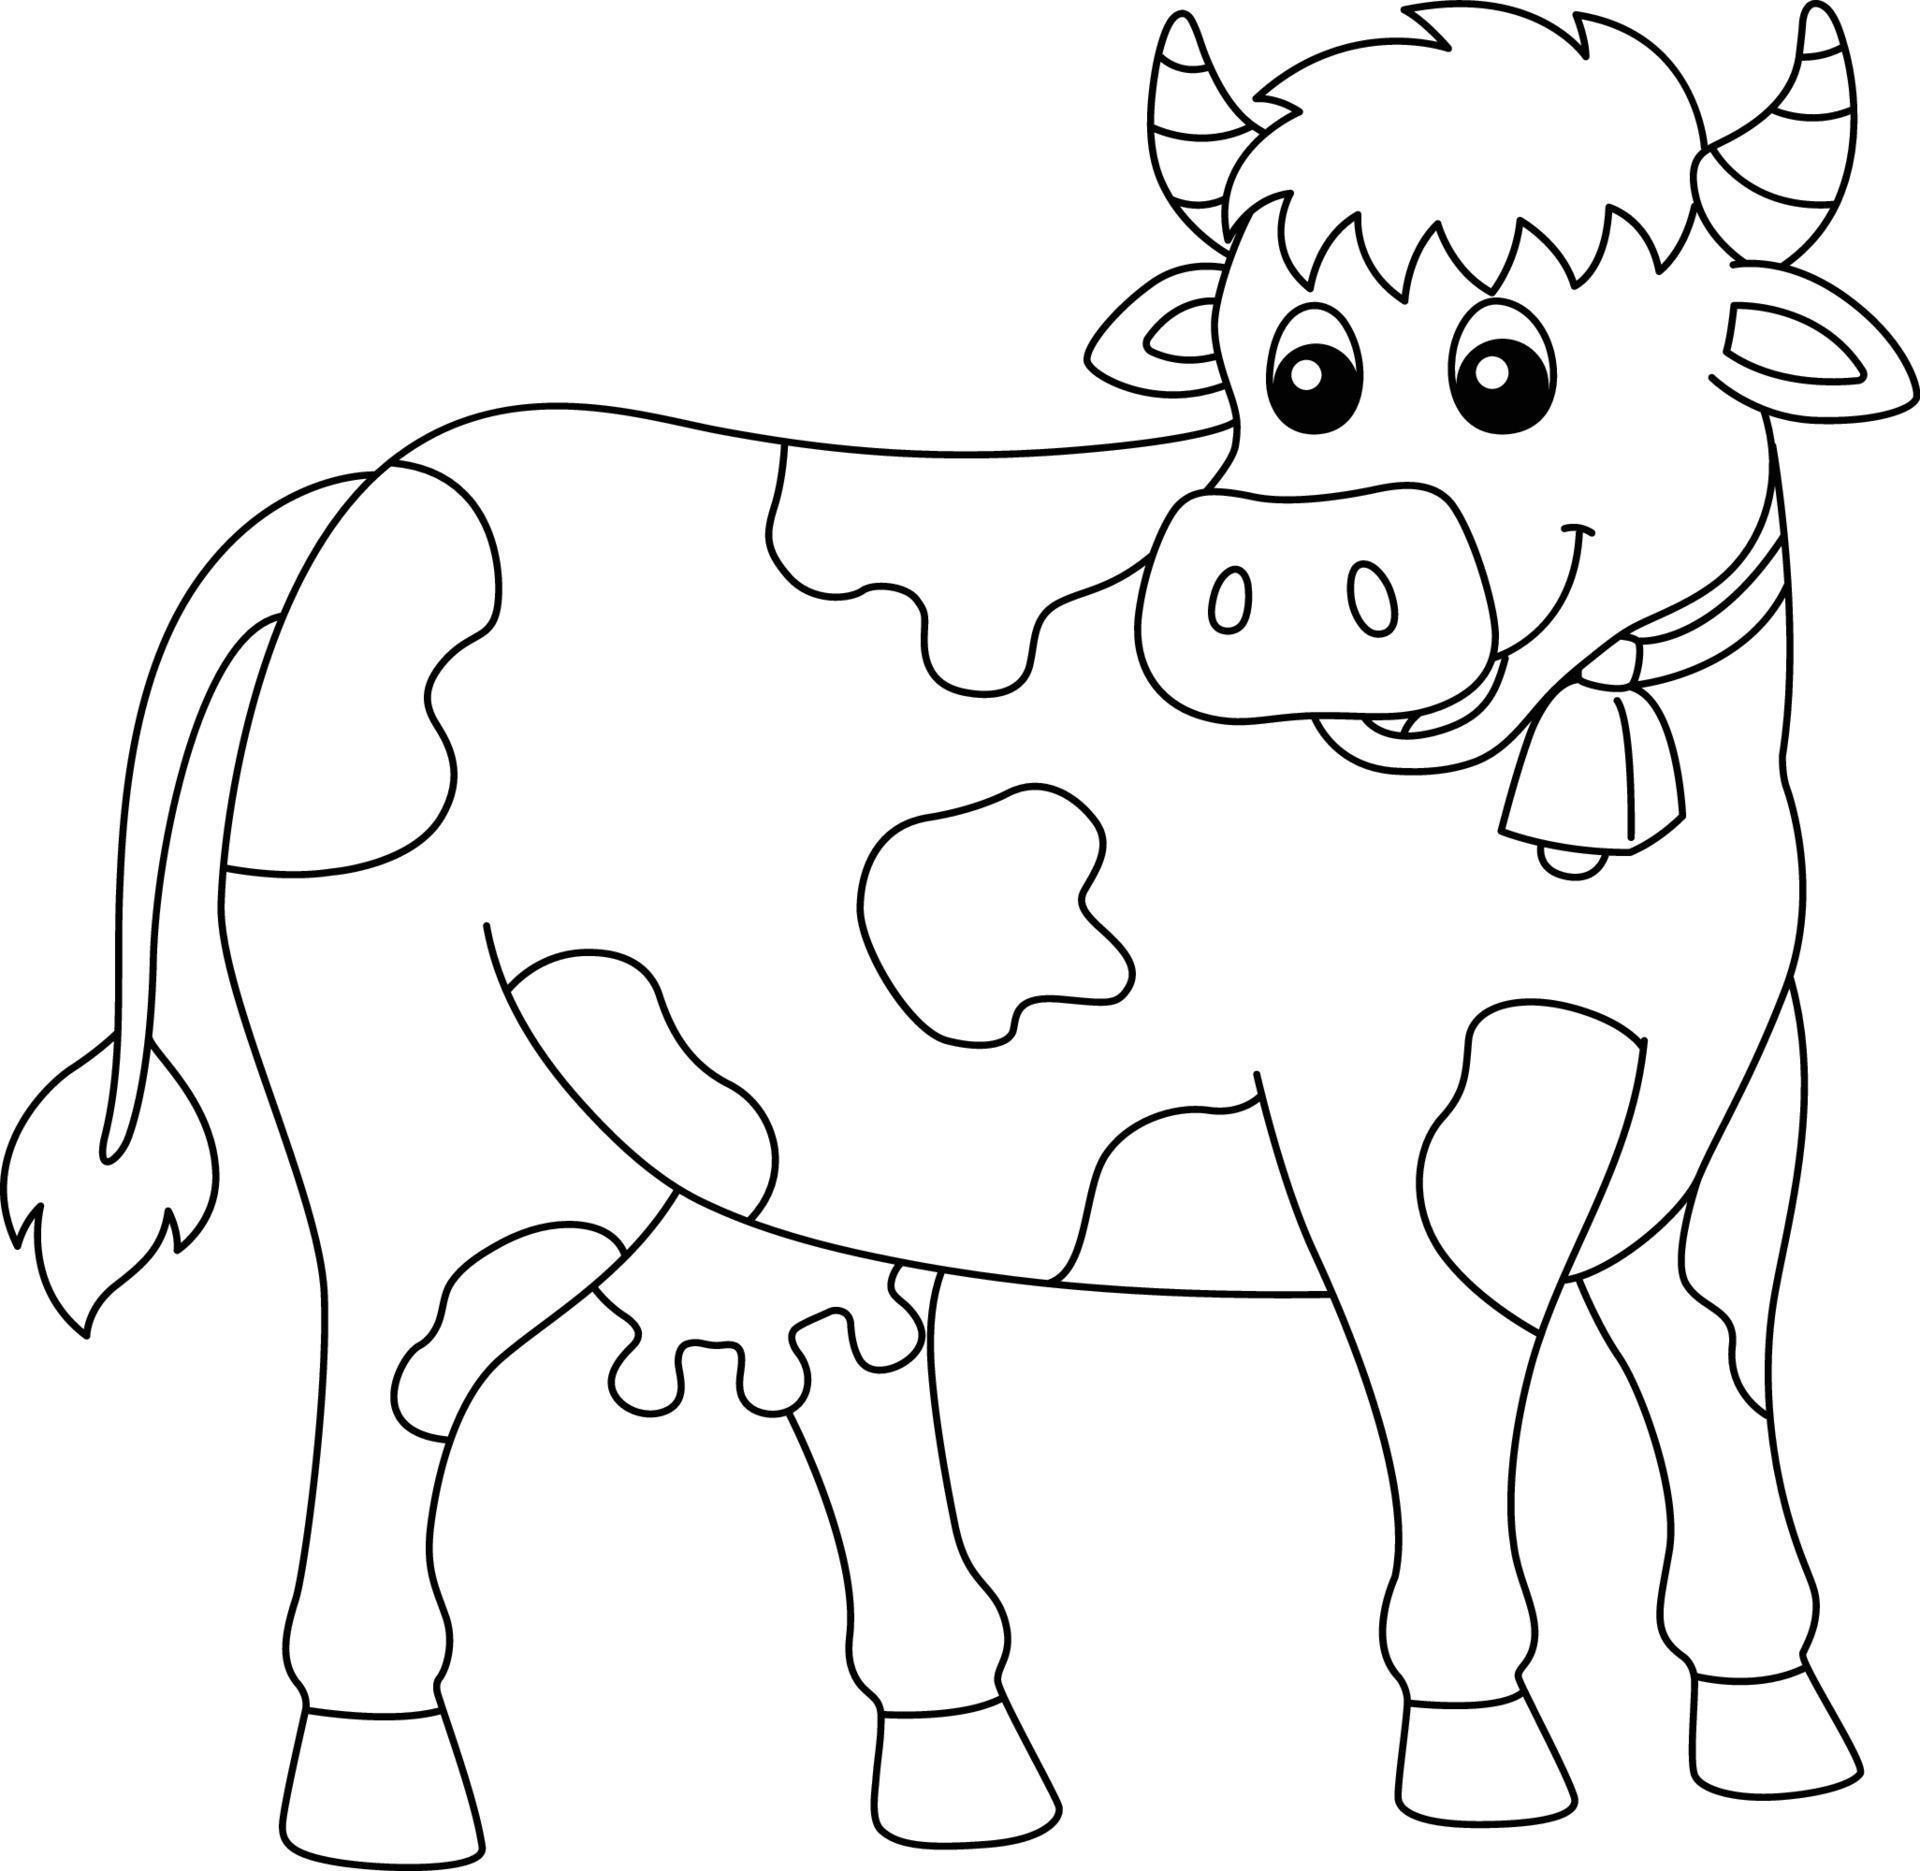 Impressive cow coloring page for 5-6 year olds